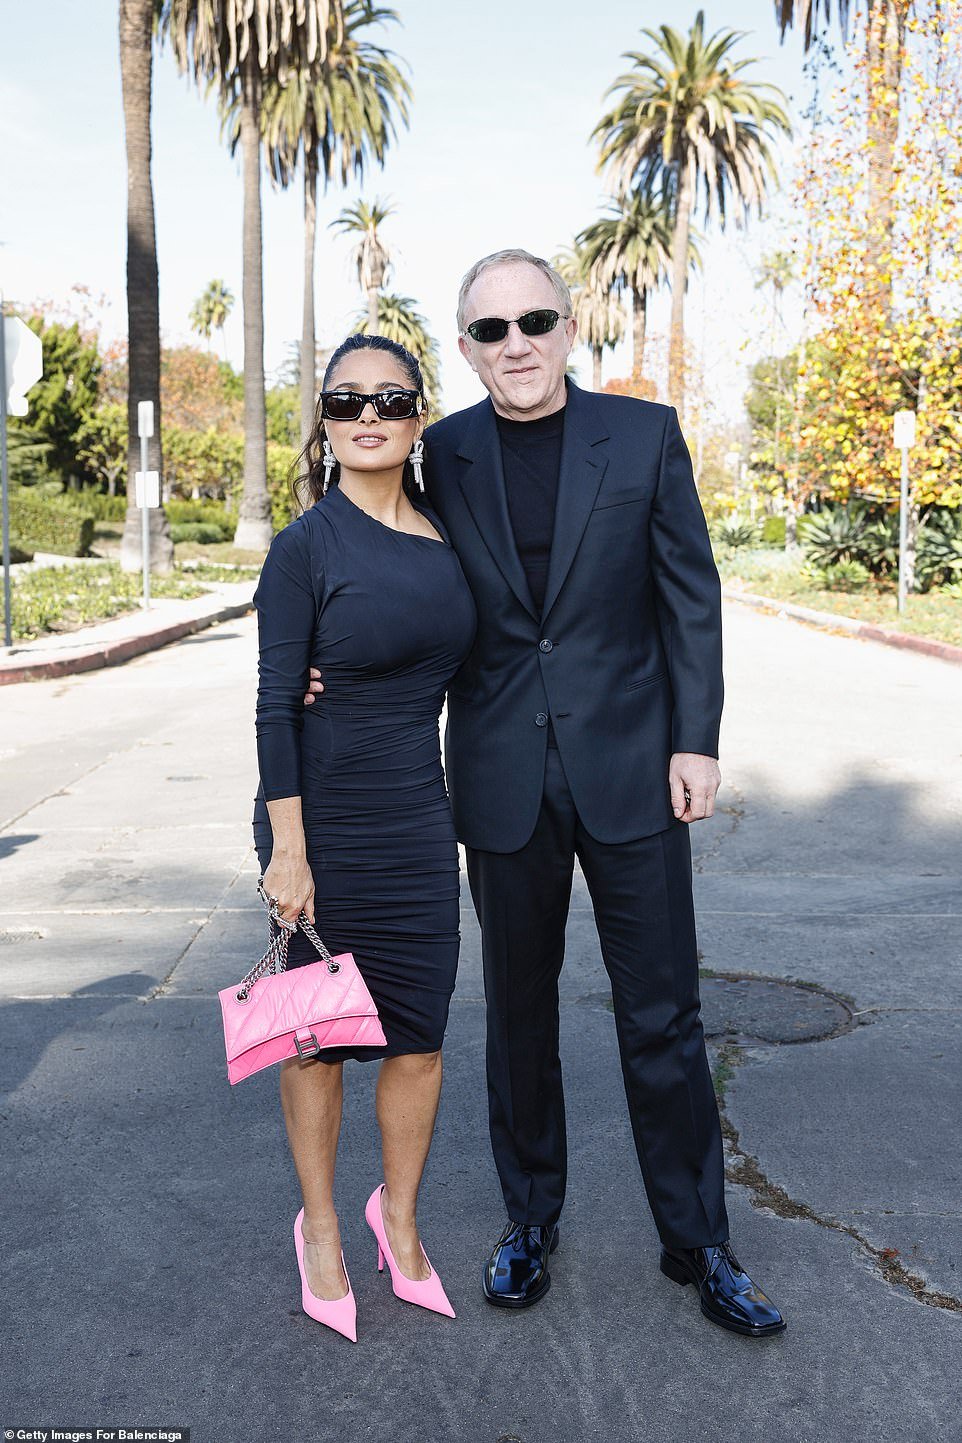 The Kering CEO looked dapper in a black suit, black shirt and sunglasses